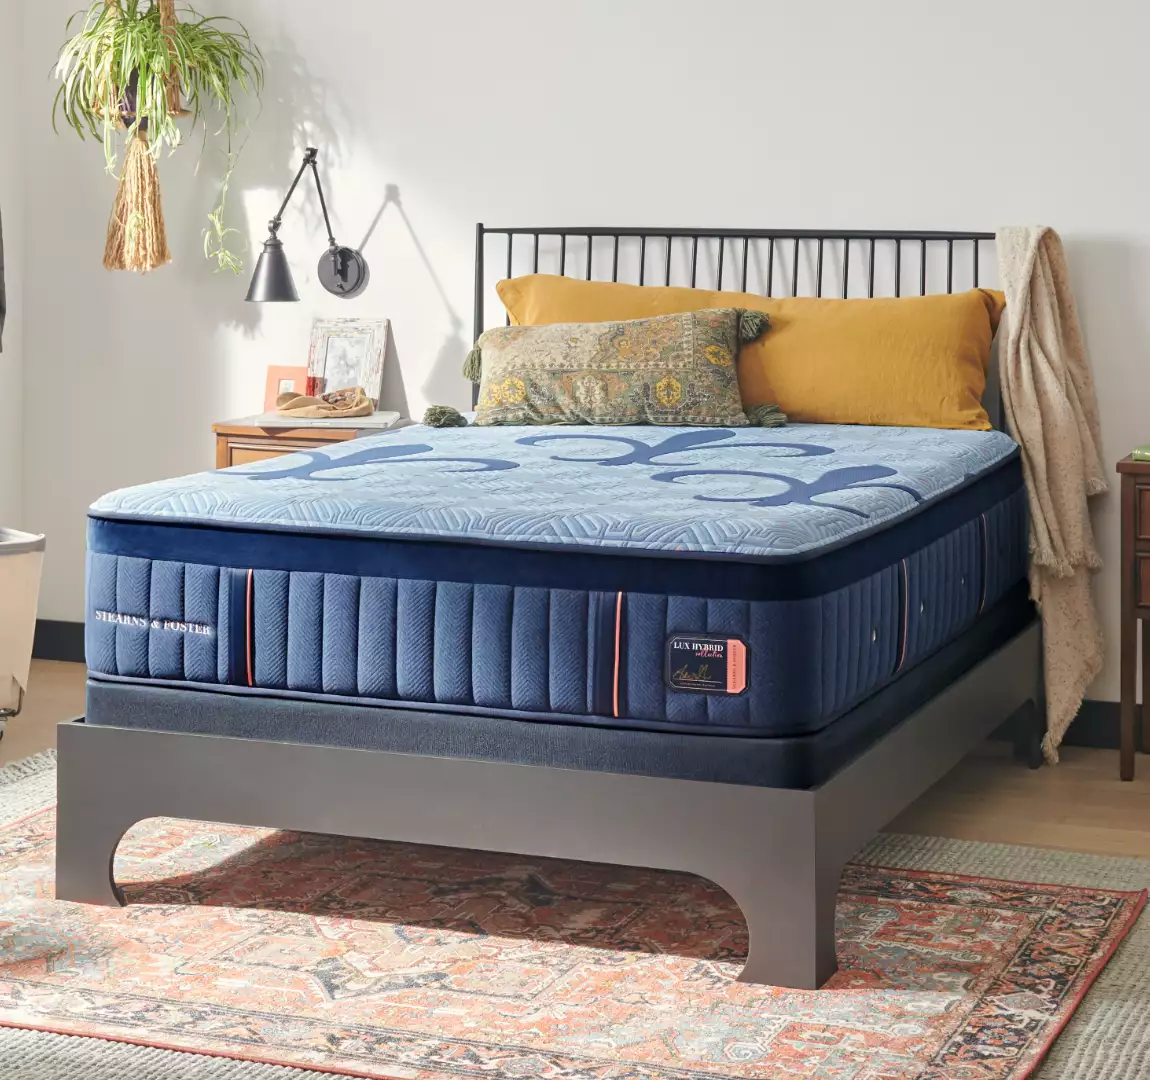 Stearns and Foster Lux Hybrid Mattress Collection image